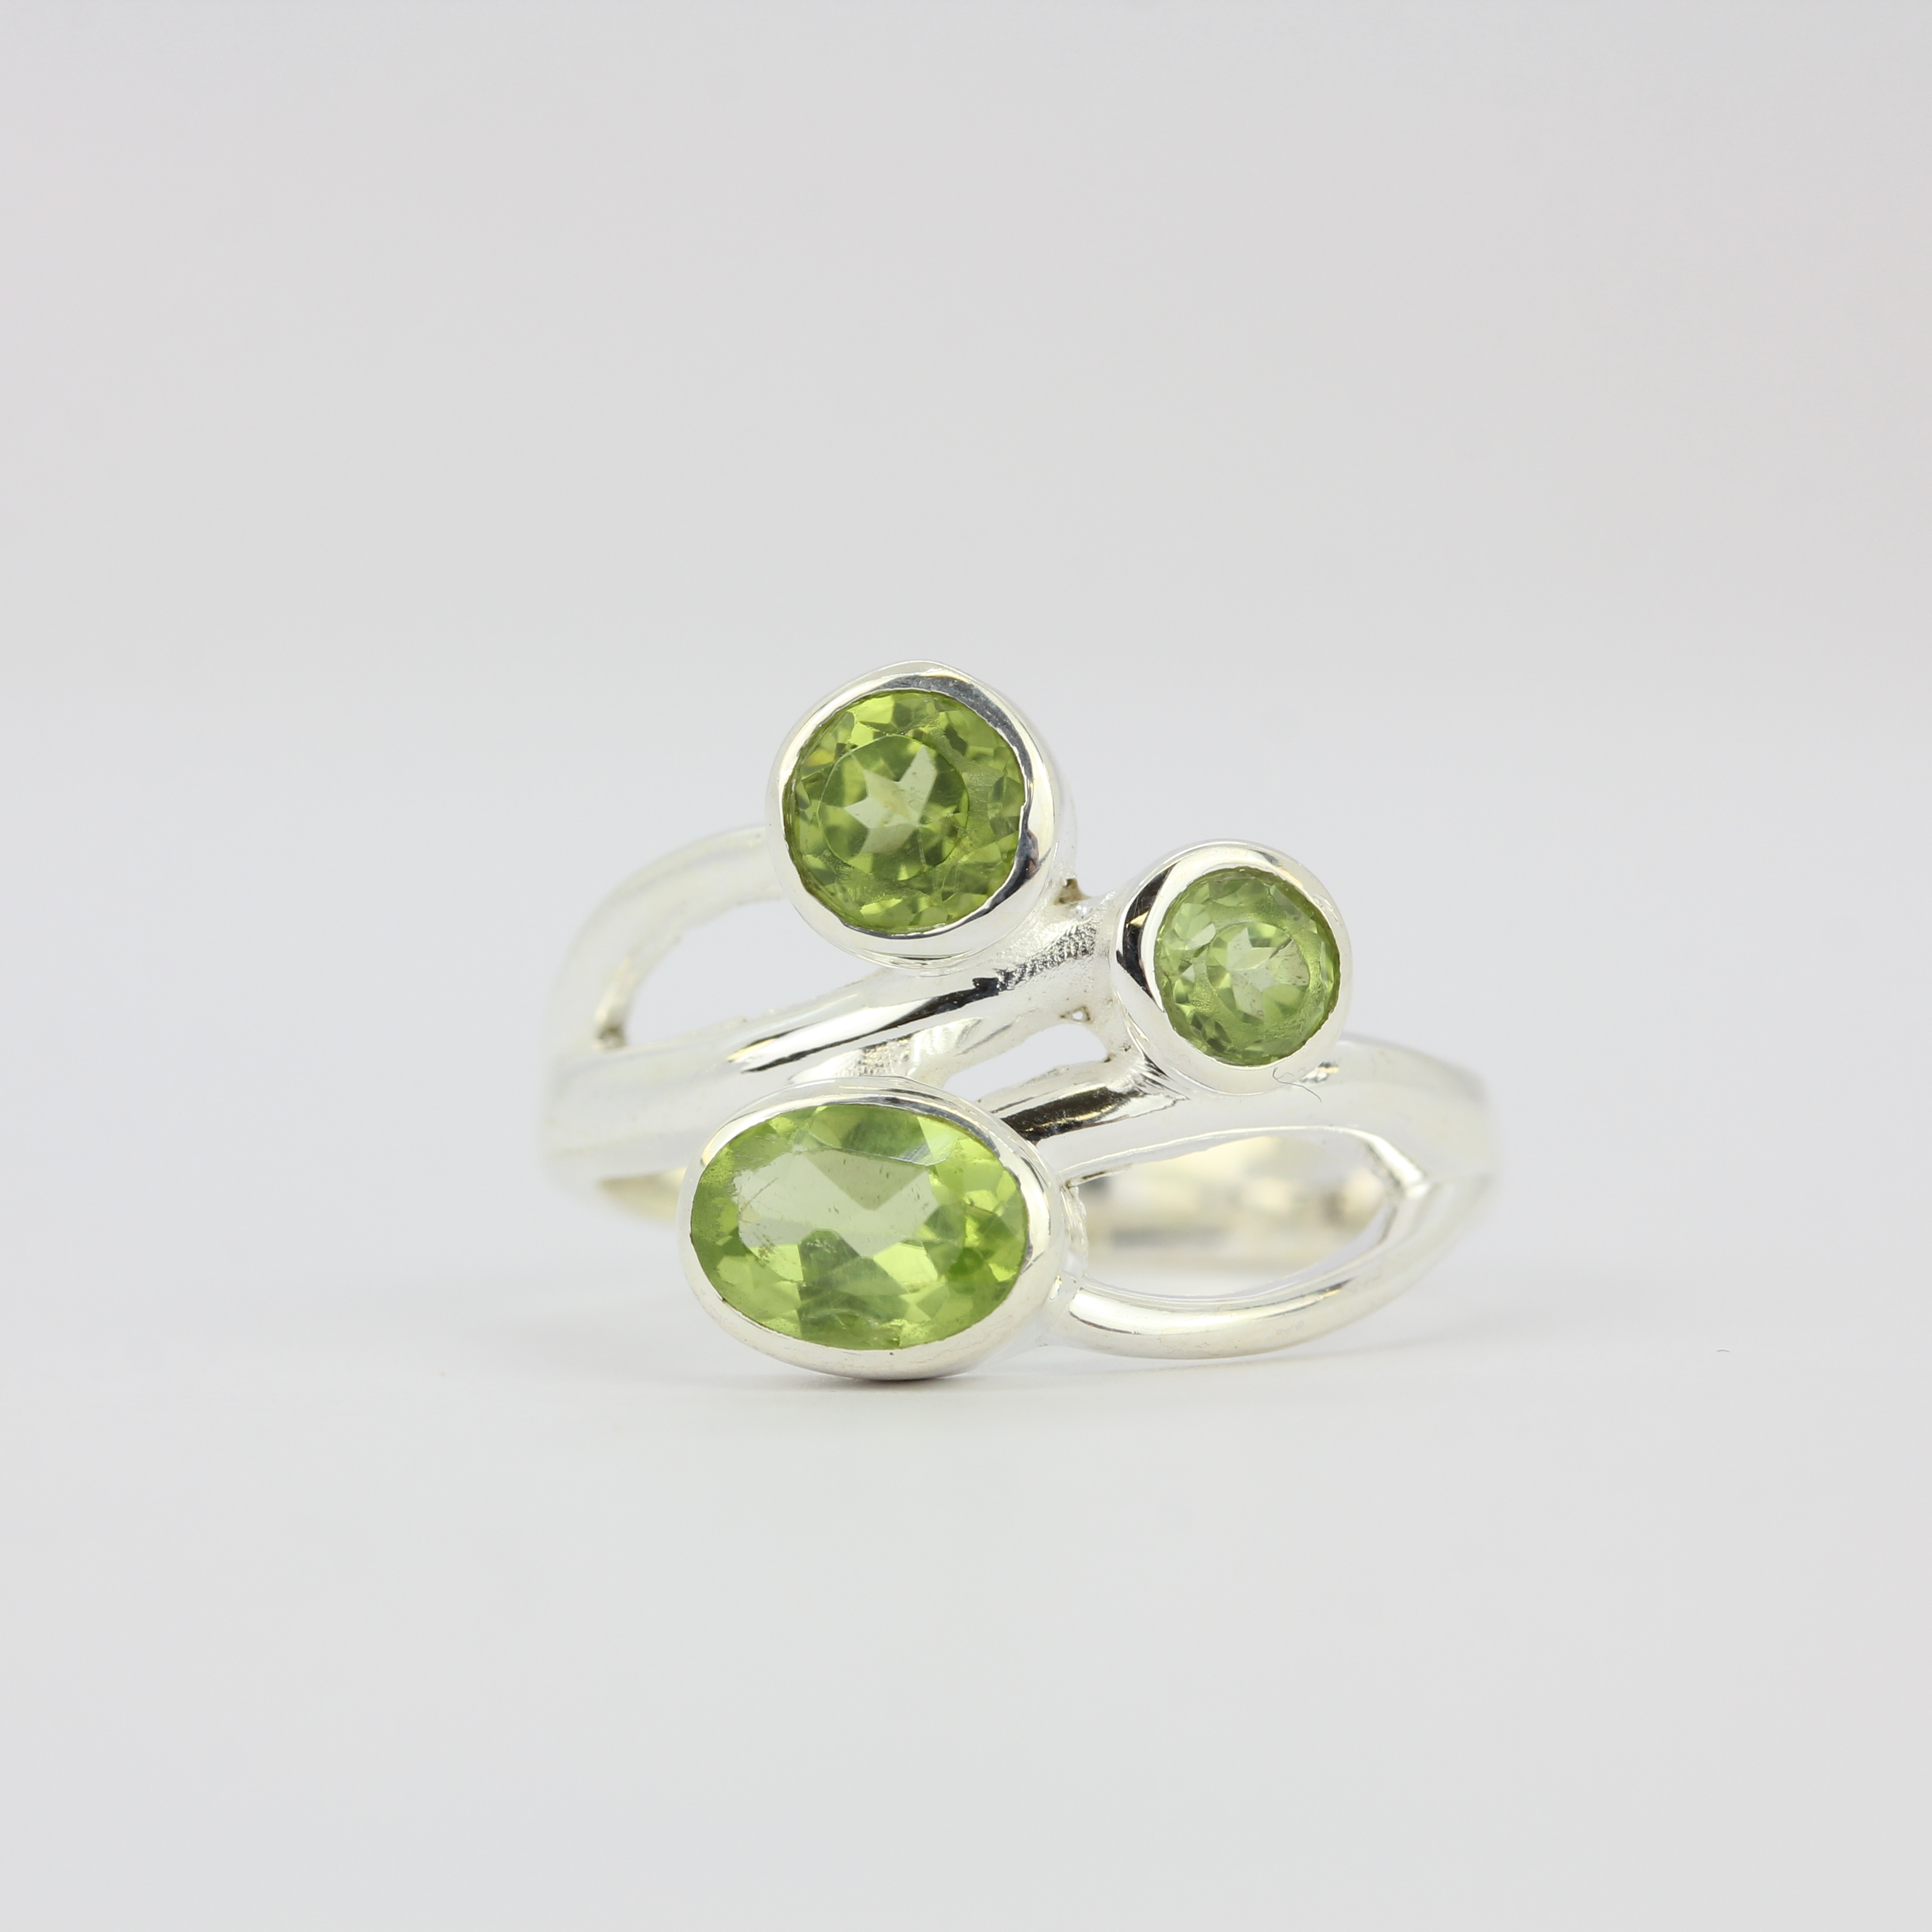 A 925 silver ring set with oval and round cut peridots.